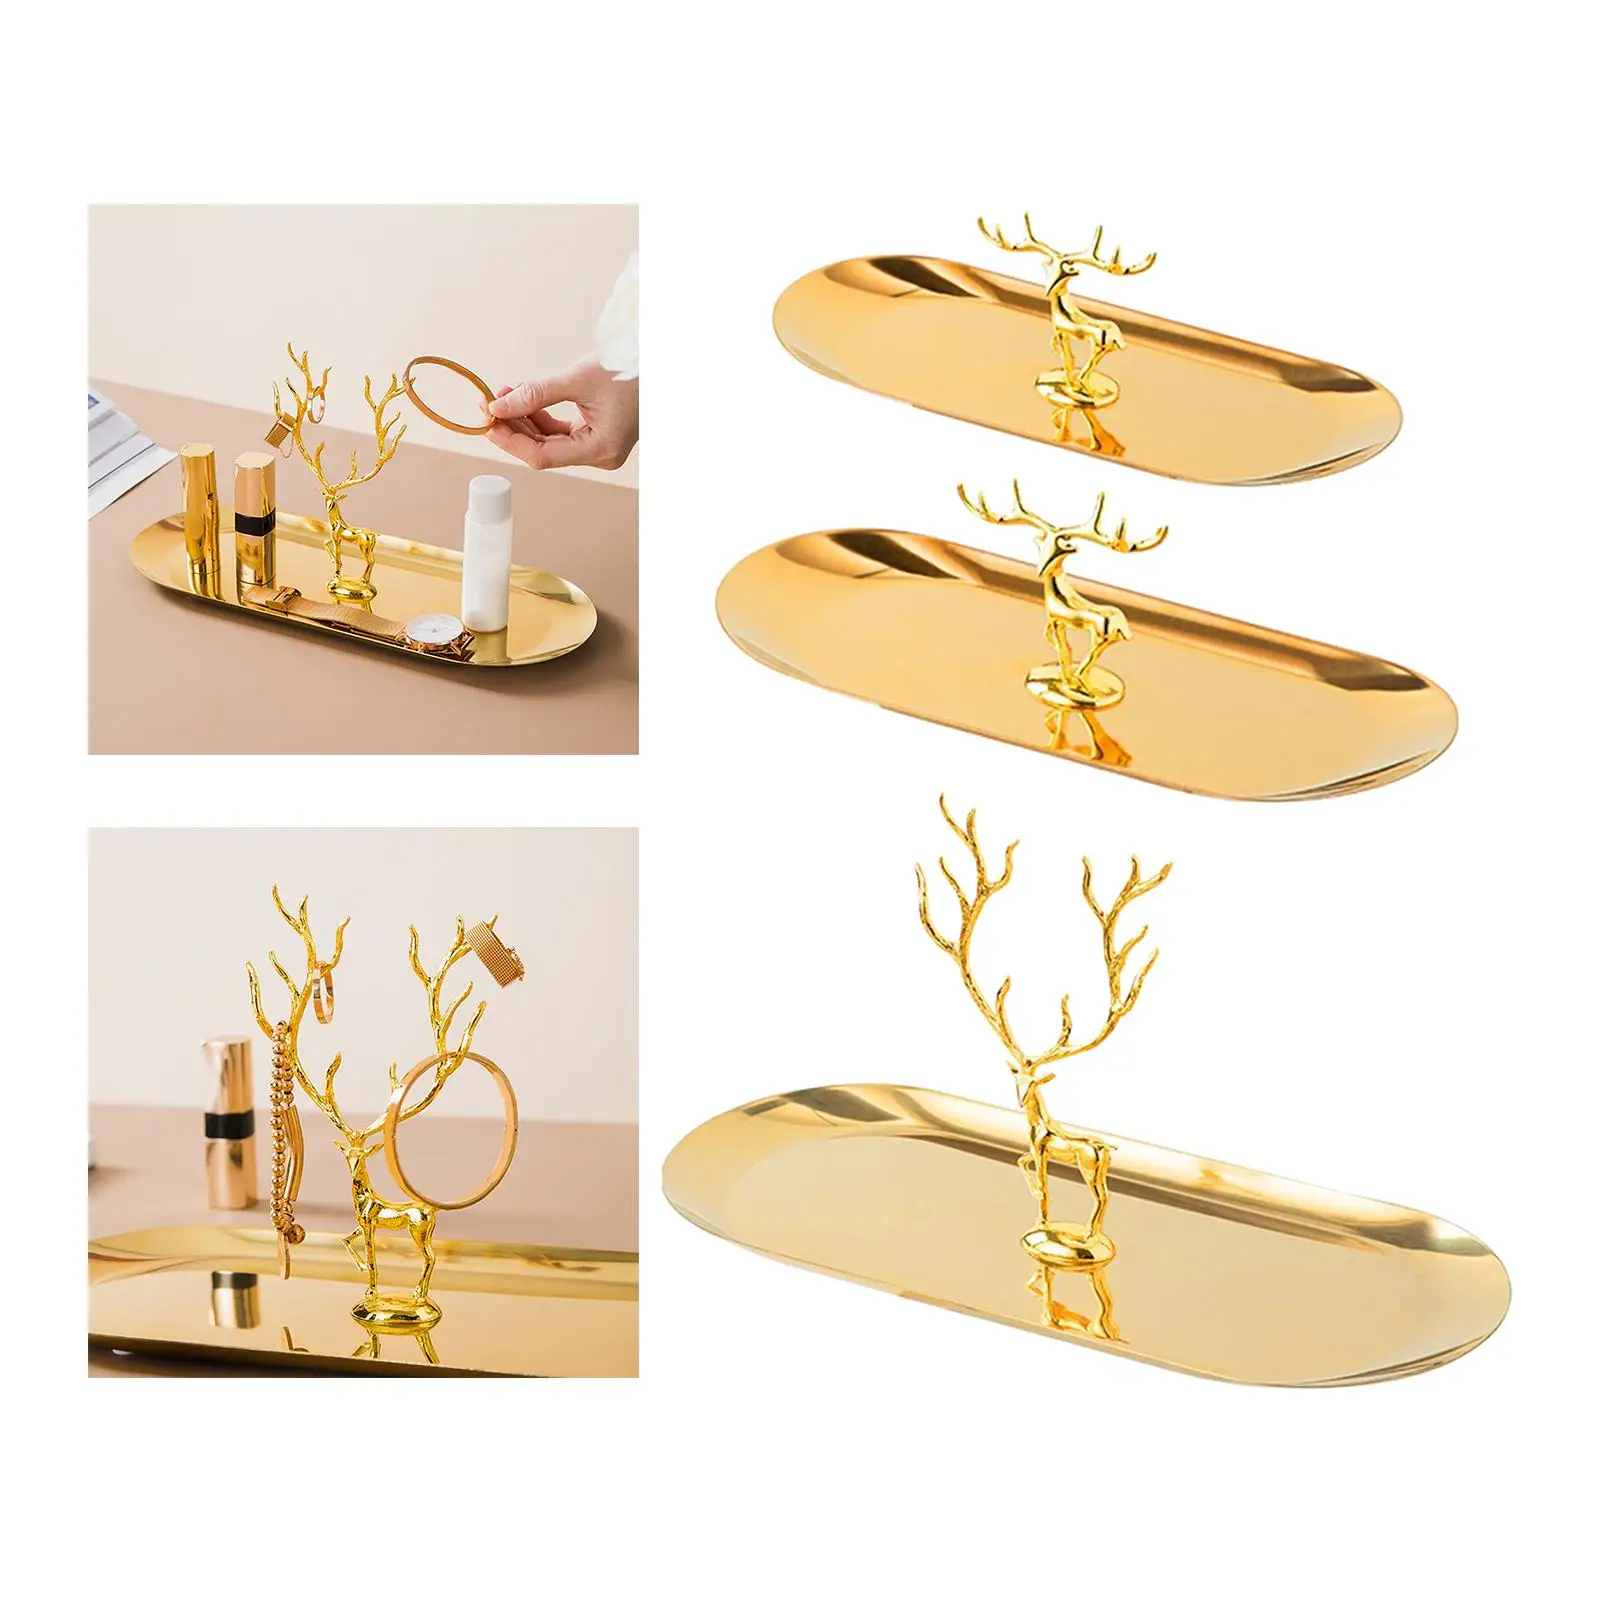 Golden Jewelry Tray Accessory Tray Holder Dish for Necklaces Watches Bathroom